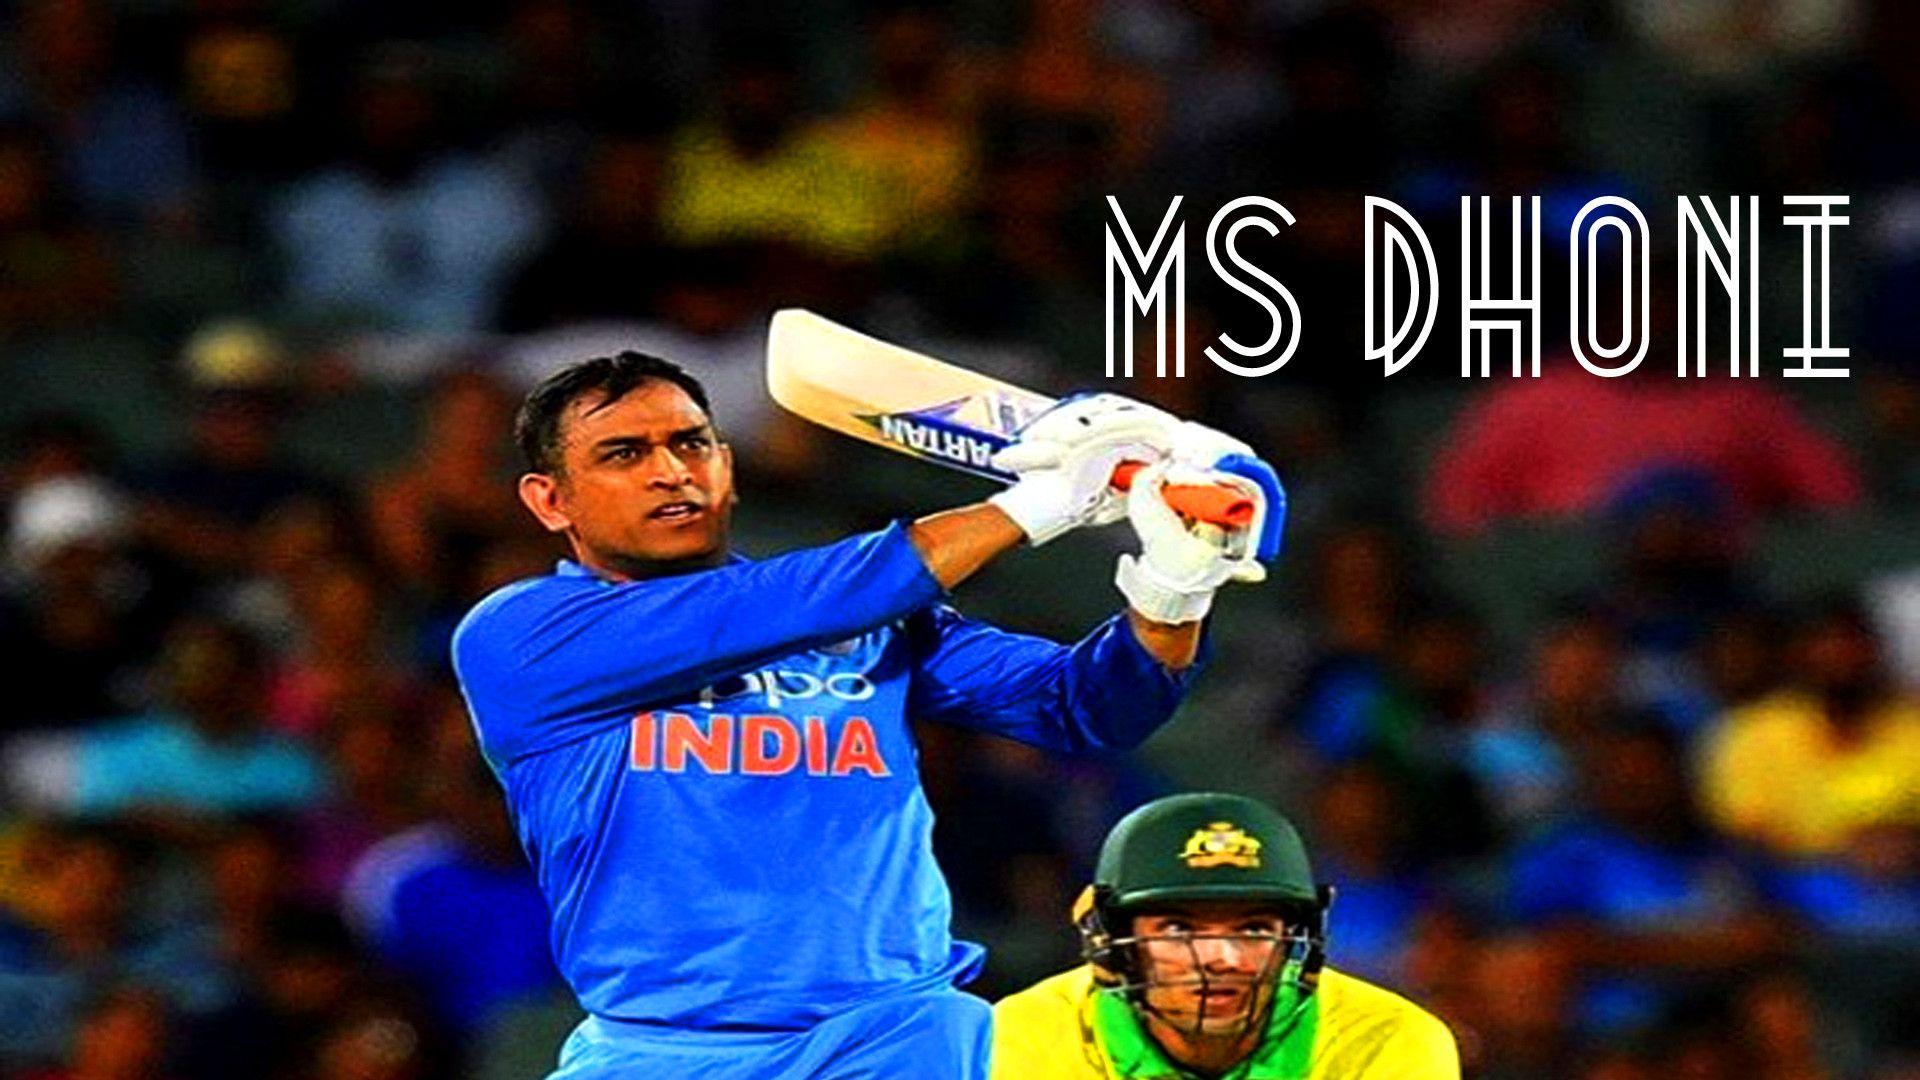 Dhoni HD Wallpapers - Top Free Dhoni HD Backgrounds - WallpaperAccess